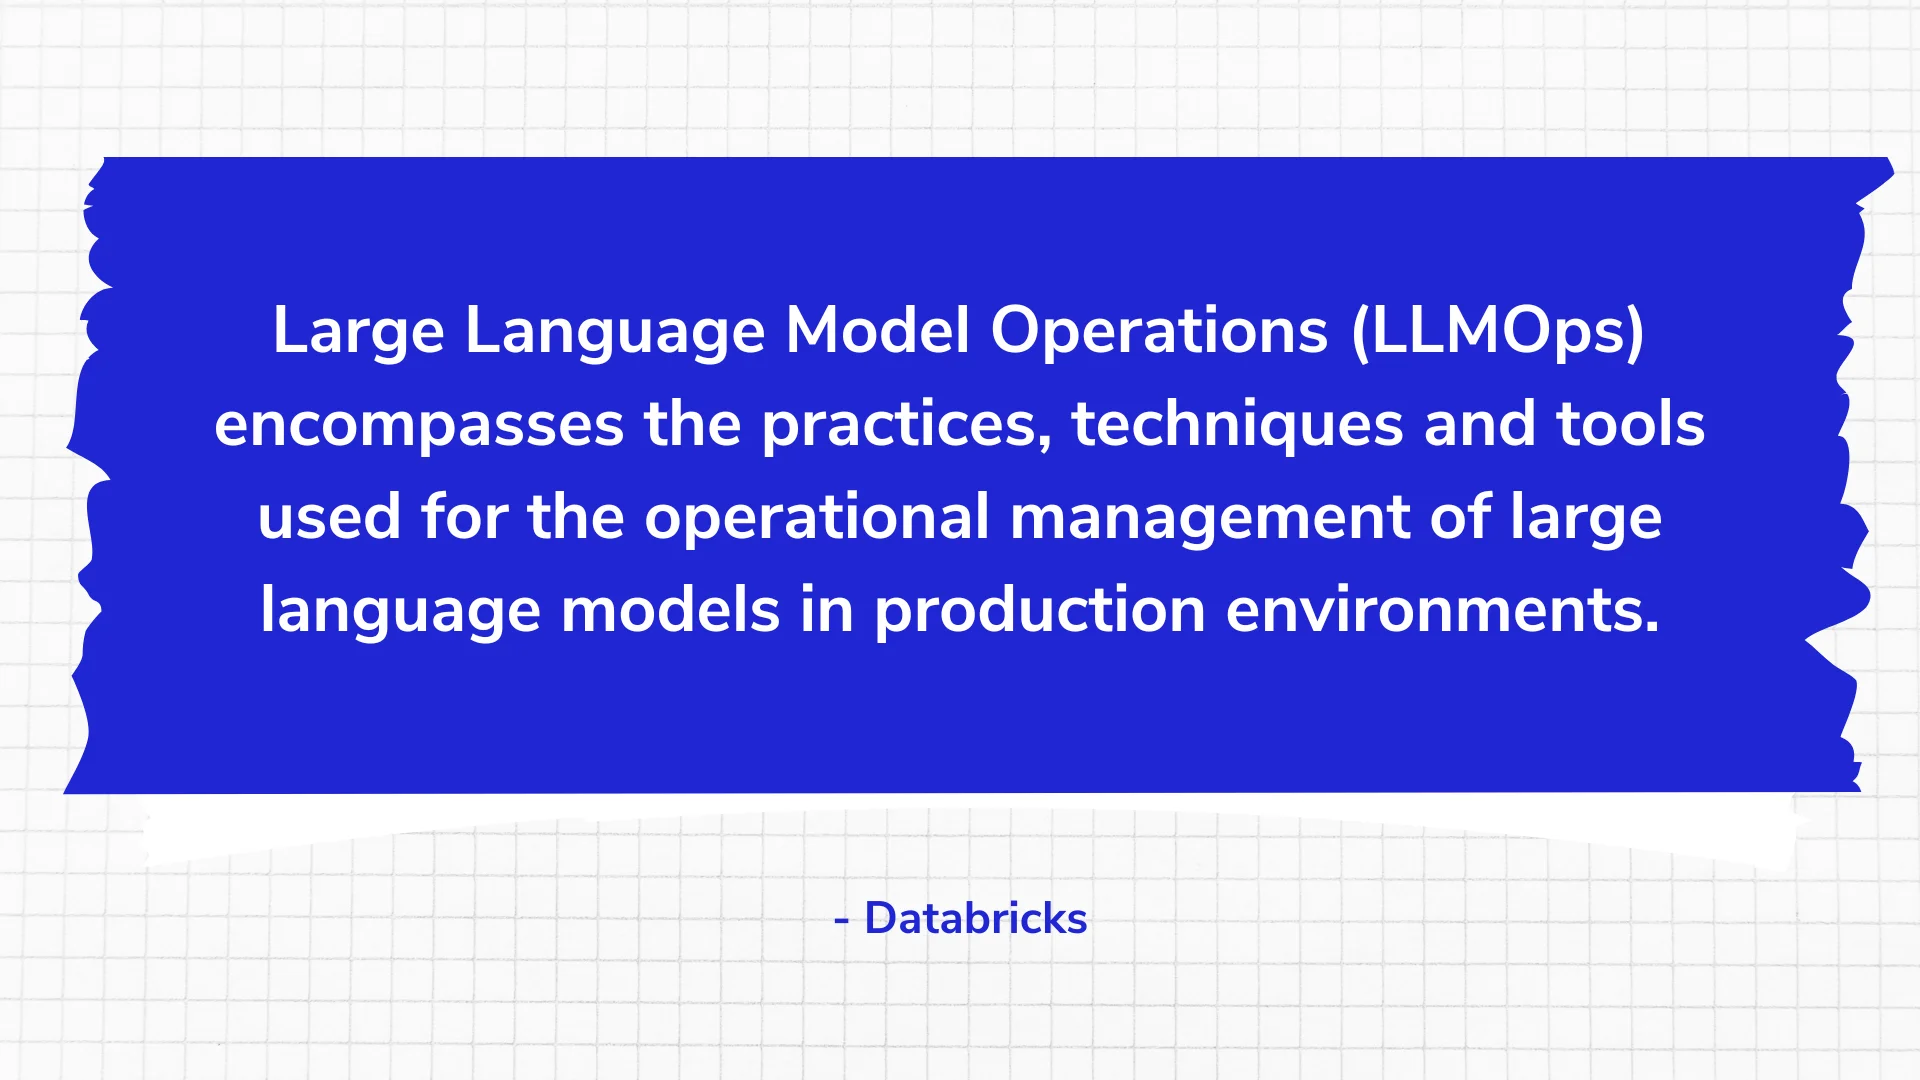 Large Language Model Operations - LLMOps encompasses the practices, techniques and tools used for the operational management of large language models in production environments